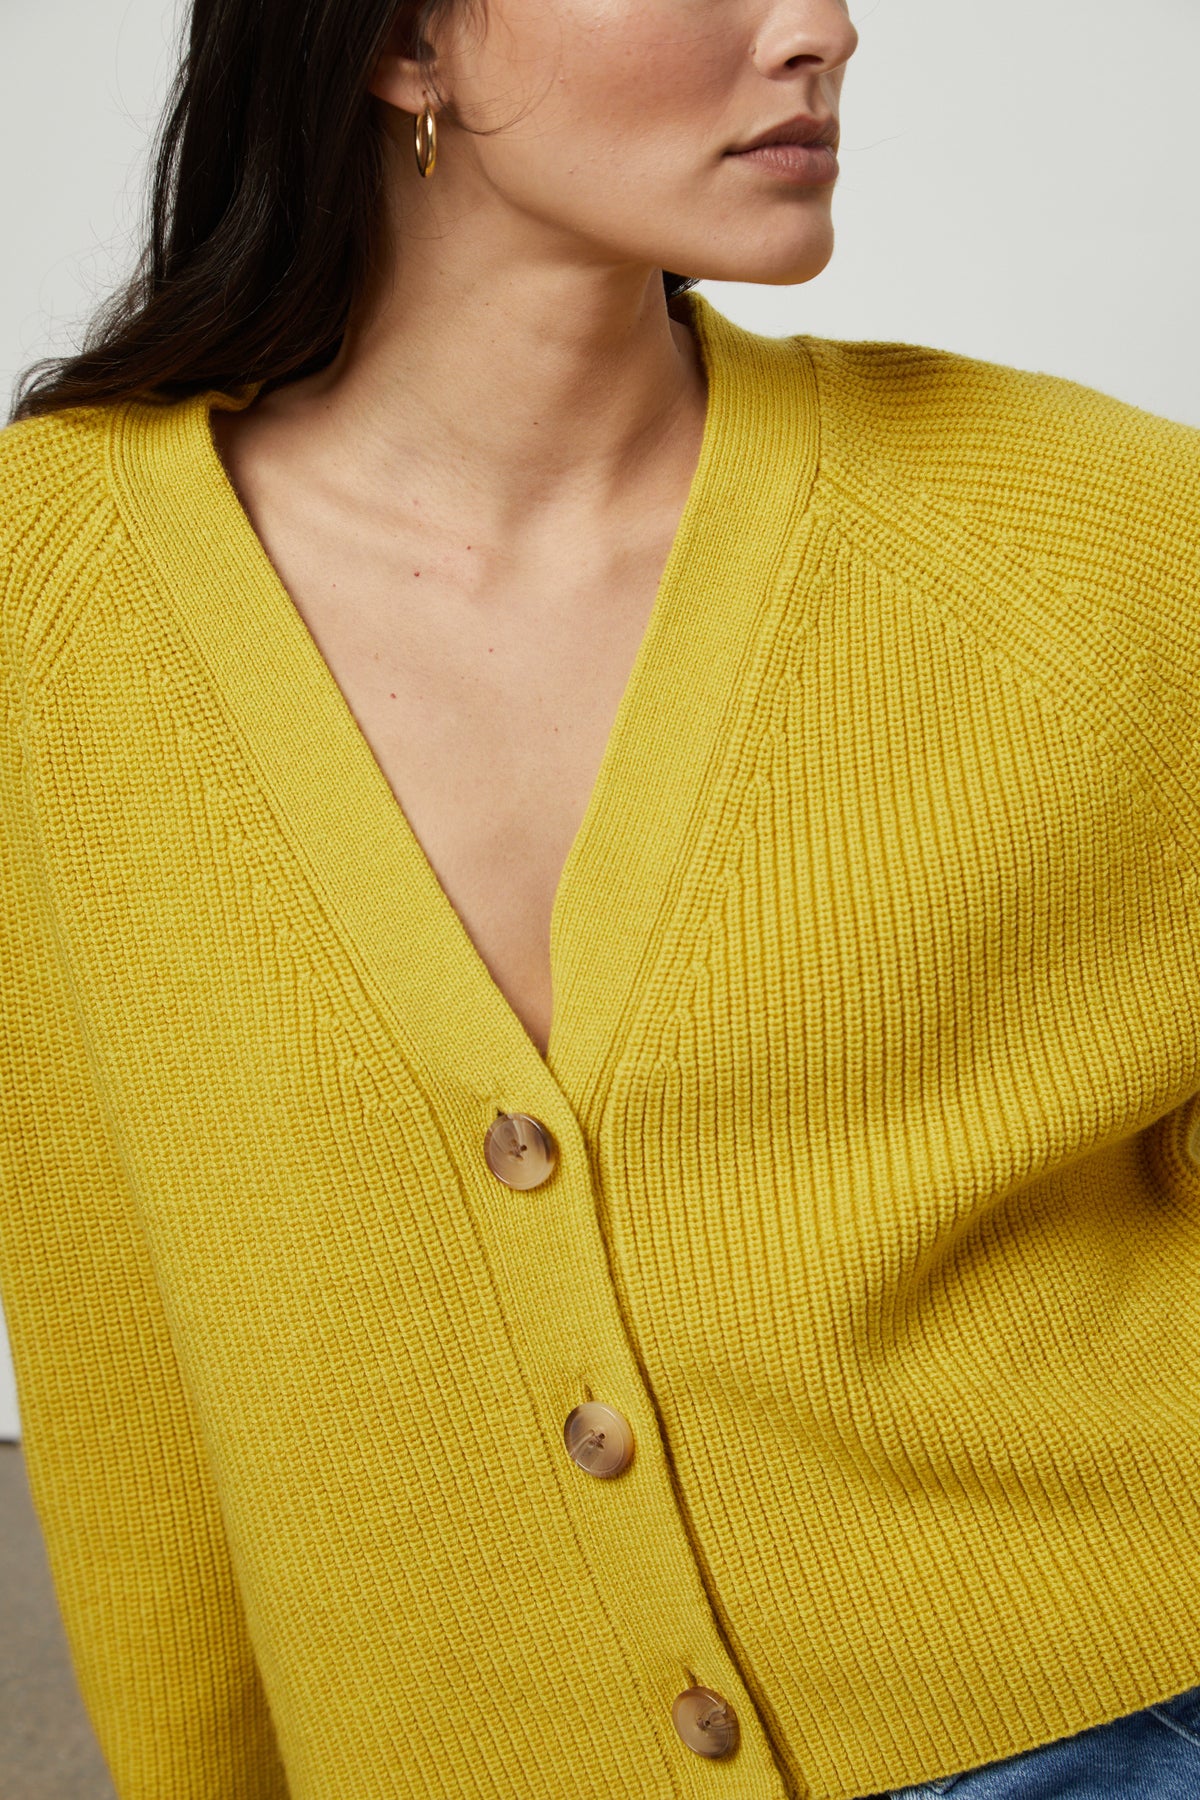 The model is wearing a yellow MARILYN BUTTON FRONT CARDIGAN sweater by Velvet by Graham & Spencer close up detail.-26727747027137